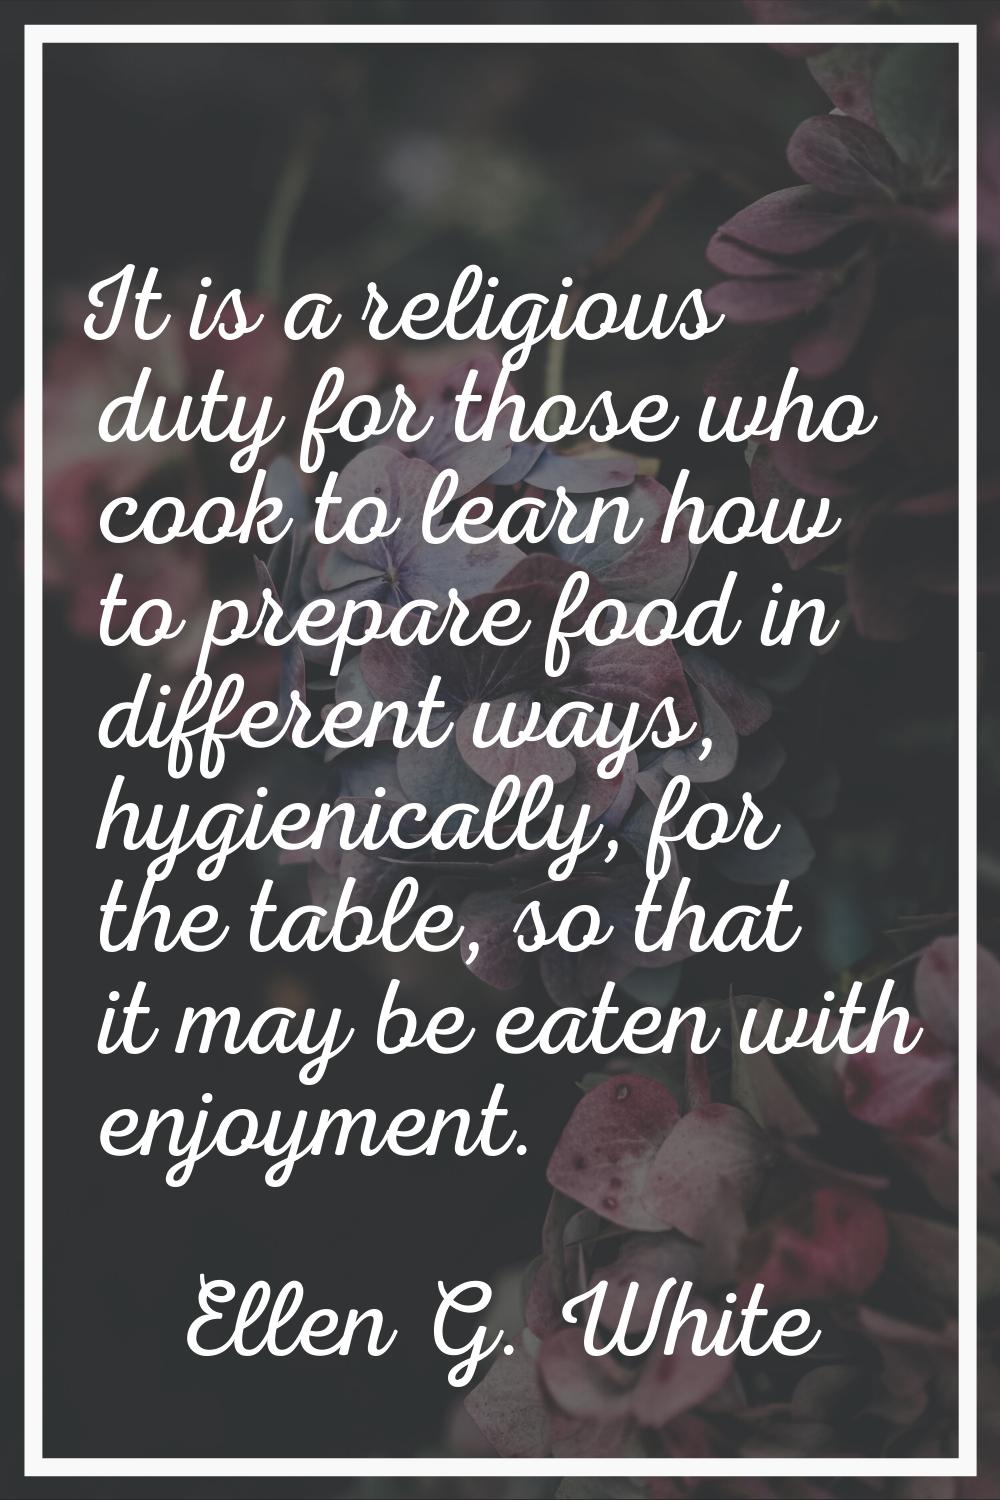 It is a religious duty for those who cook to learn how to prepare food in different ways, hygienica